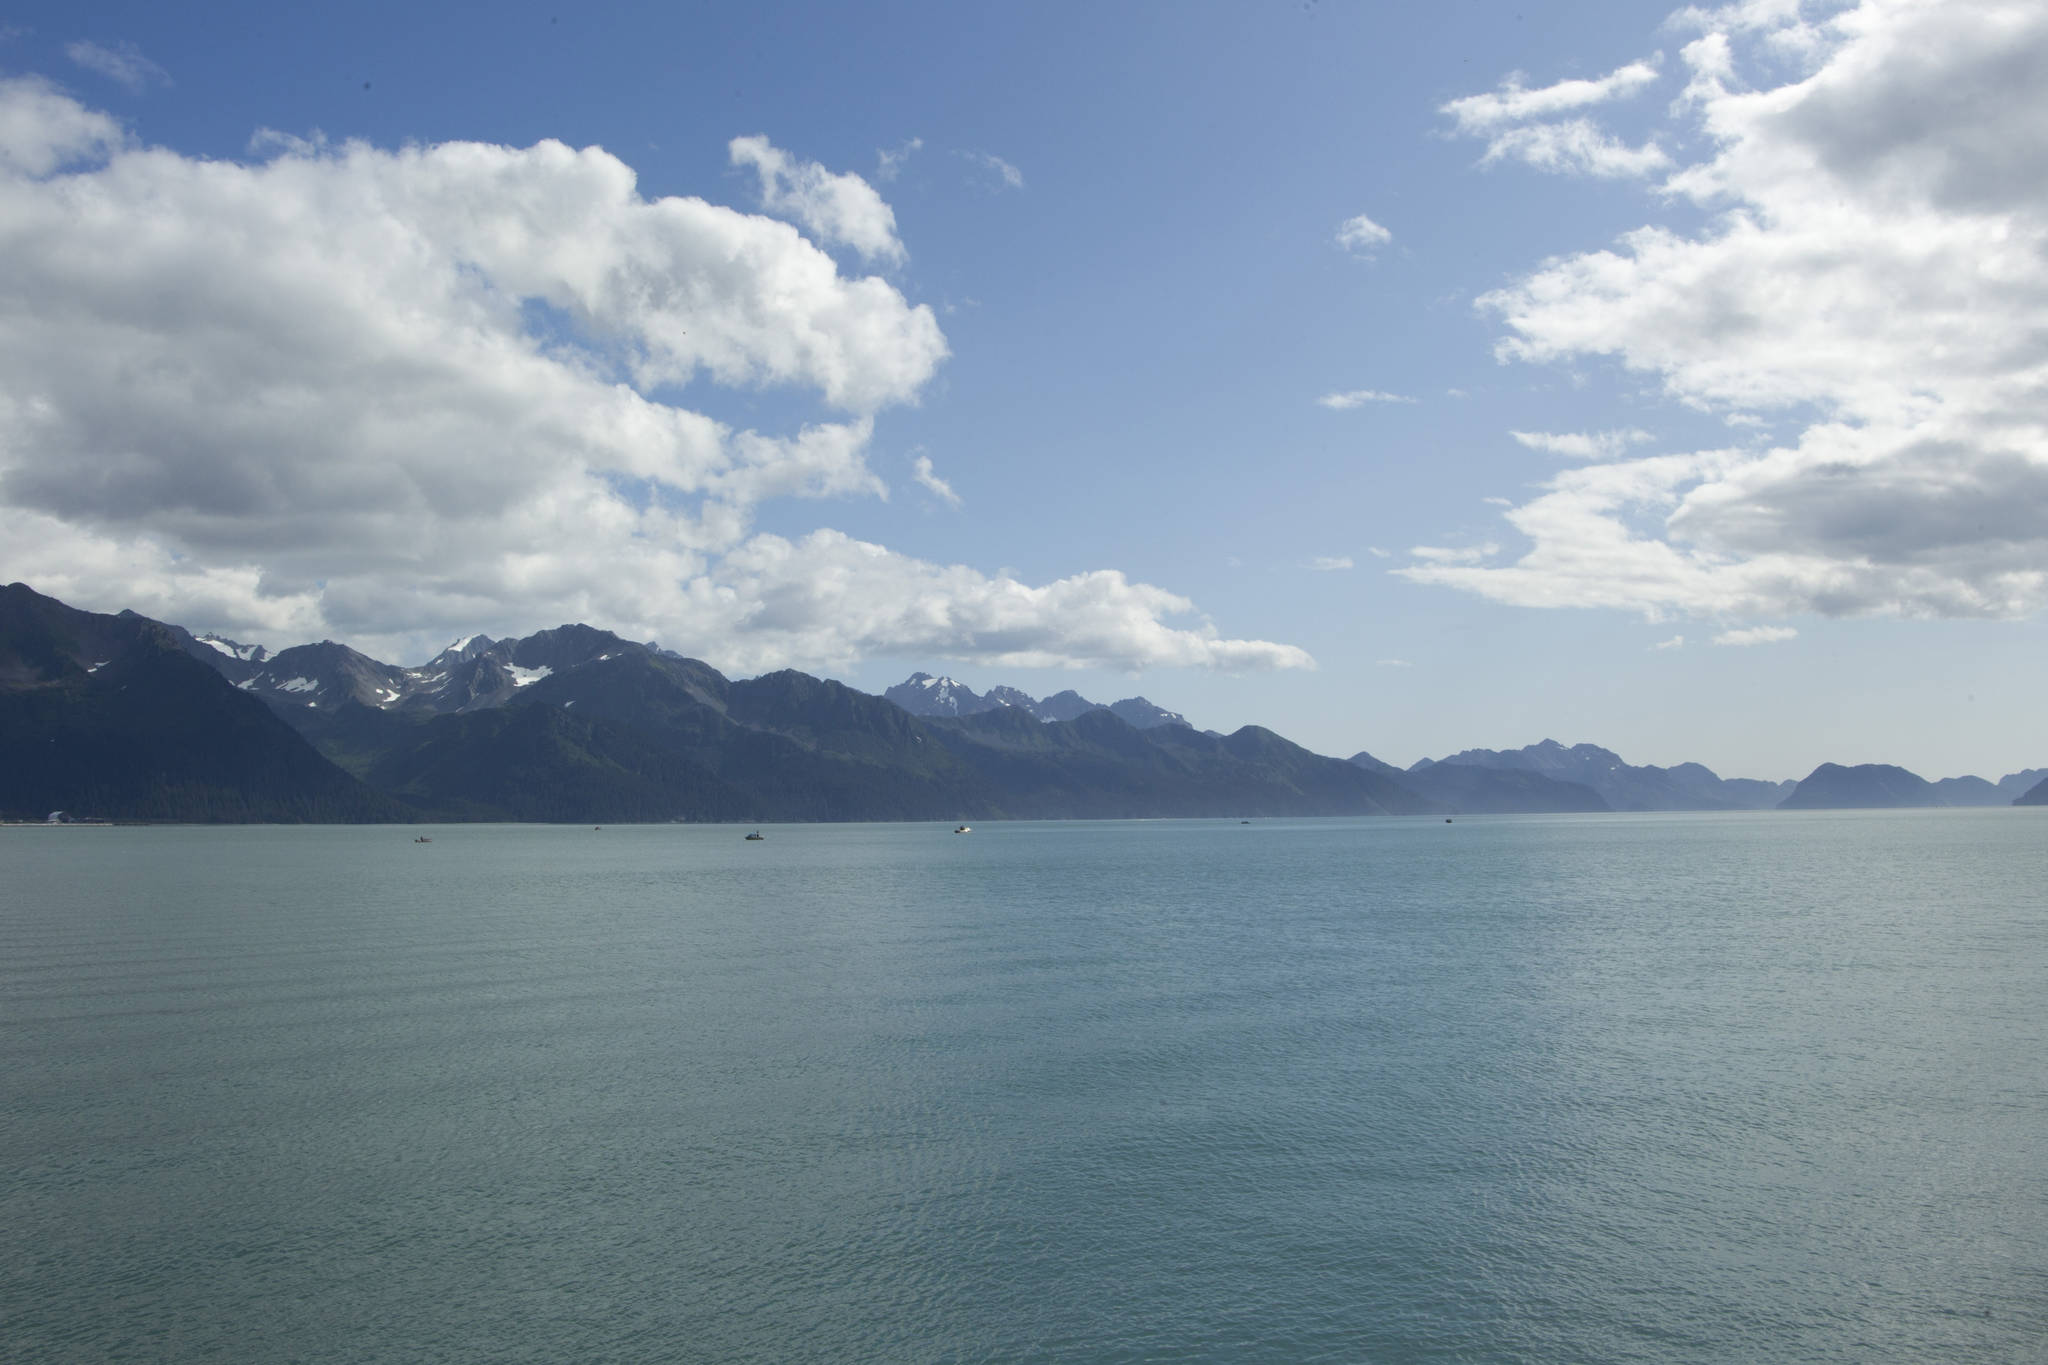 Kathleen Sorensen, “Tangled Up In Blue” columnist, is from Seward, the Alaska tourist town mentioned in this week’s story. Pictured is Resurrection Bay in Seward on Aug. 21, 2021. (Photo by Sarah Knapp/Homer News)